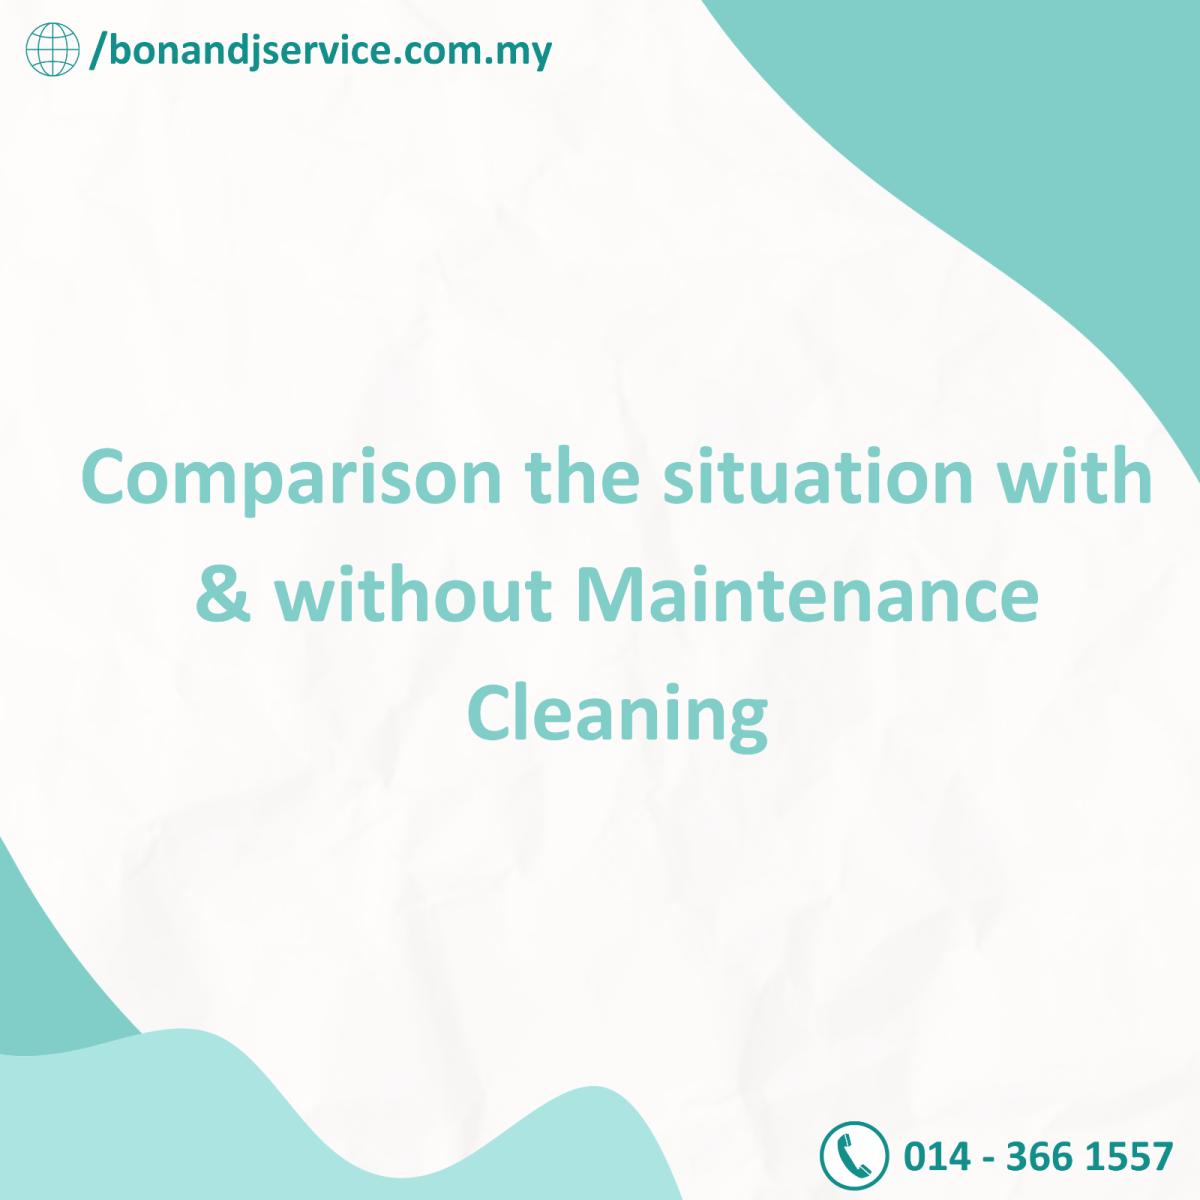 Comparison the situation with & without Maintenance Cleaning